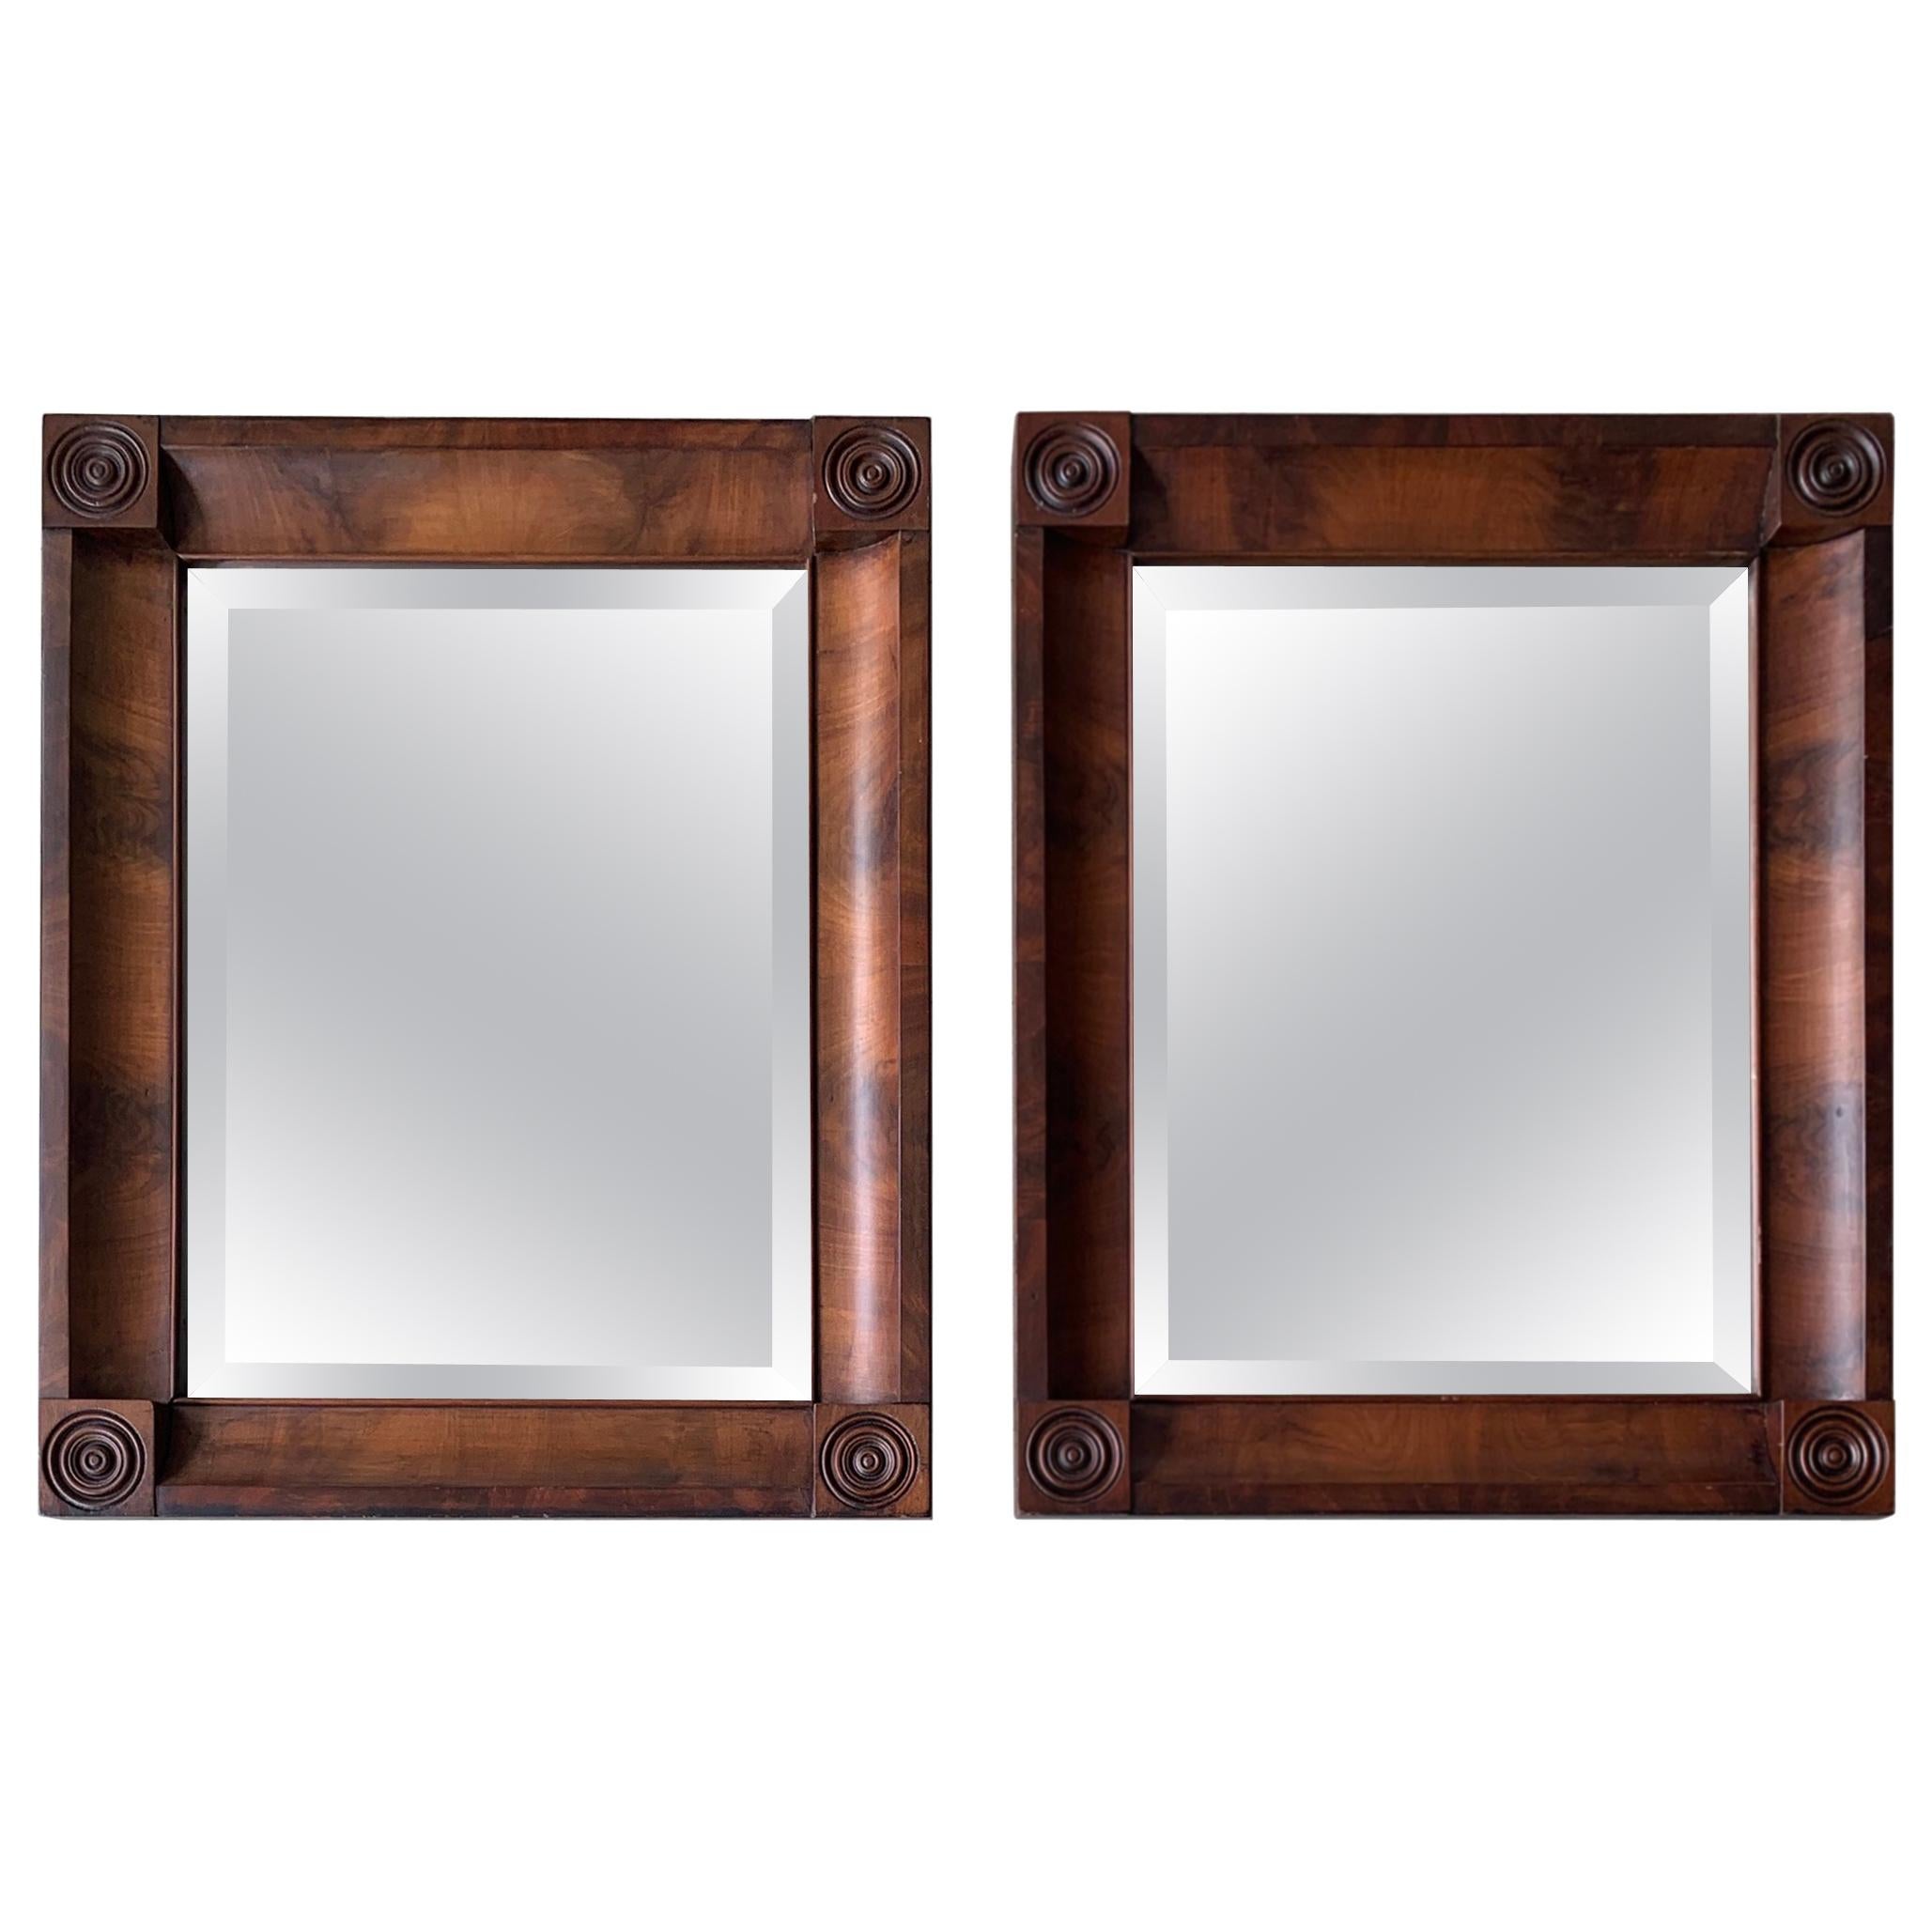 Rare and Great Condition Pair of Early 1800s Empire Style Nutwood Wall Mirrors